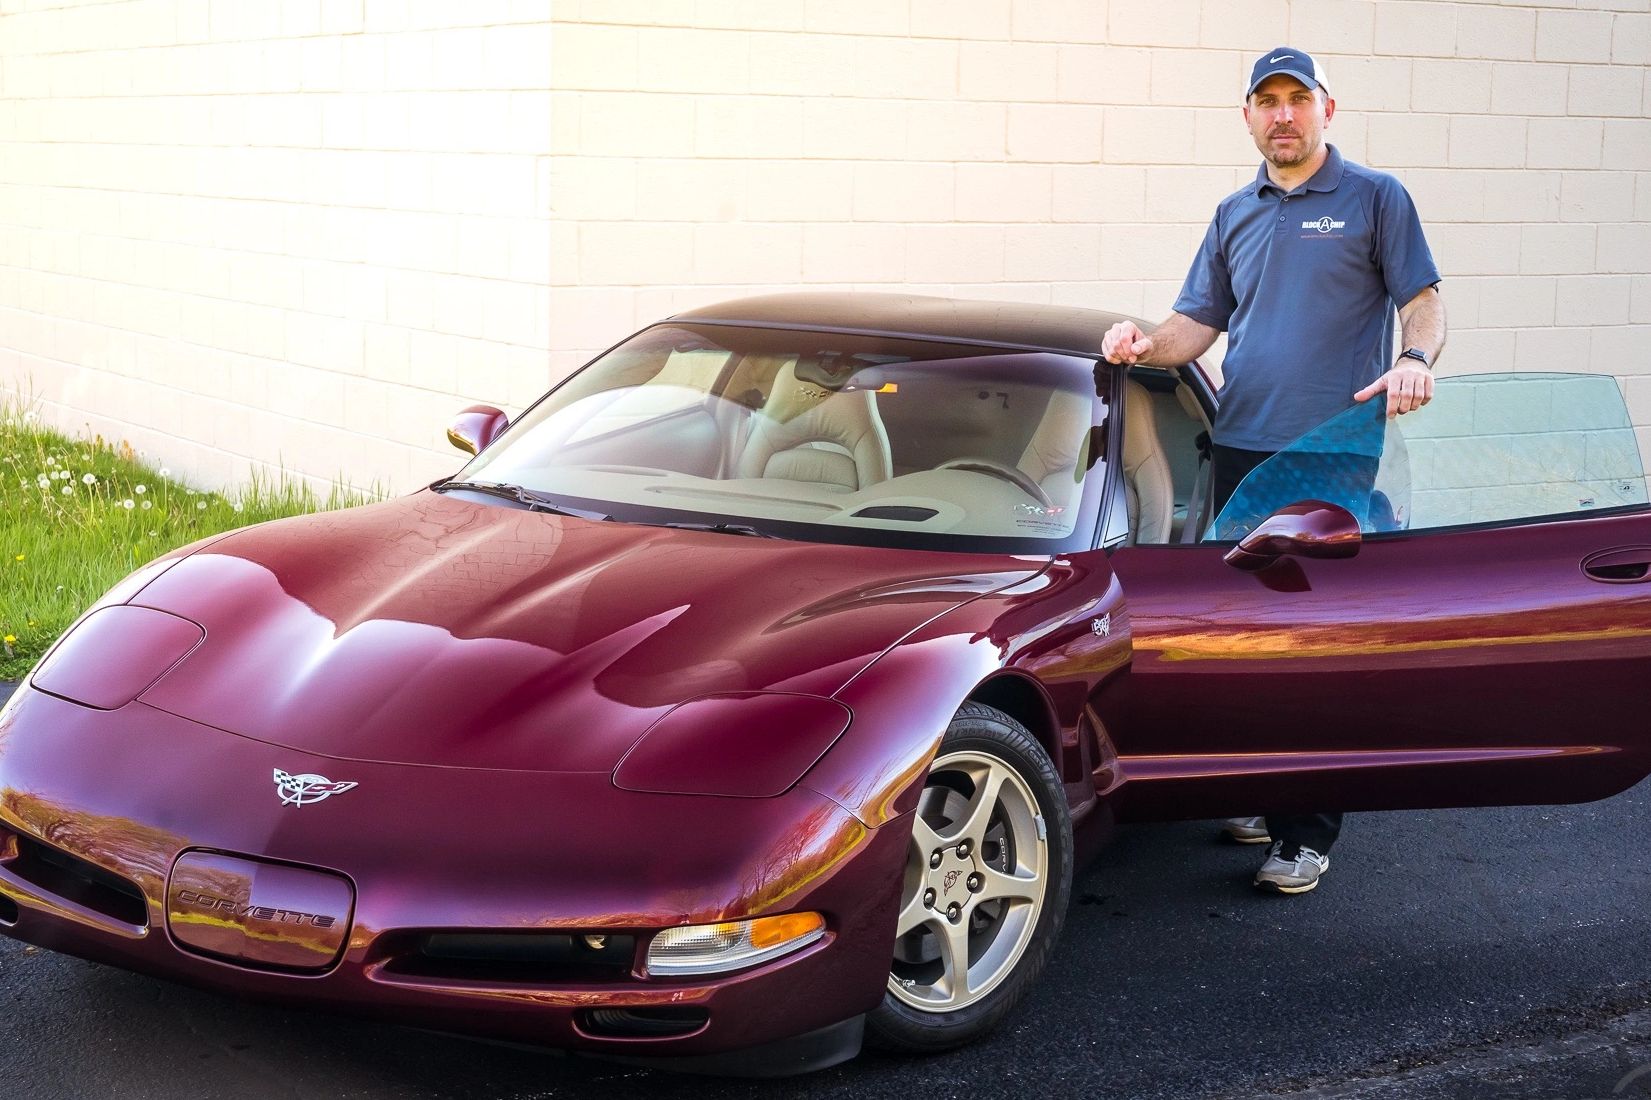 Albert, Block A Chip owner, with his 50th Anniversary Corvette.